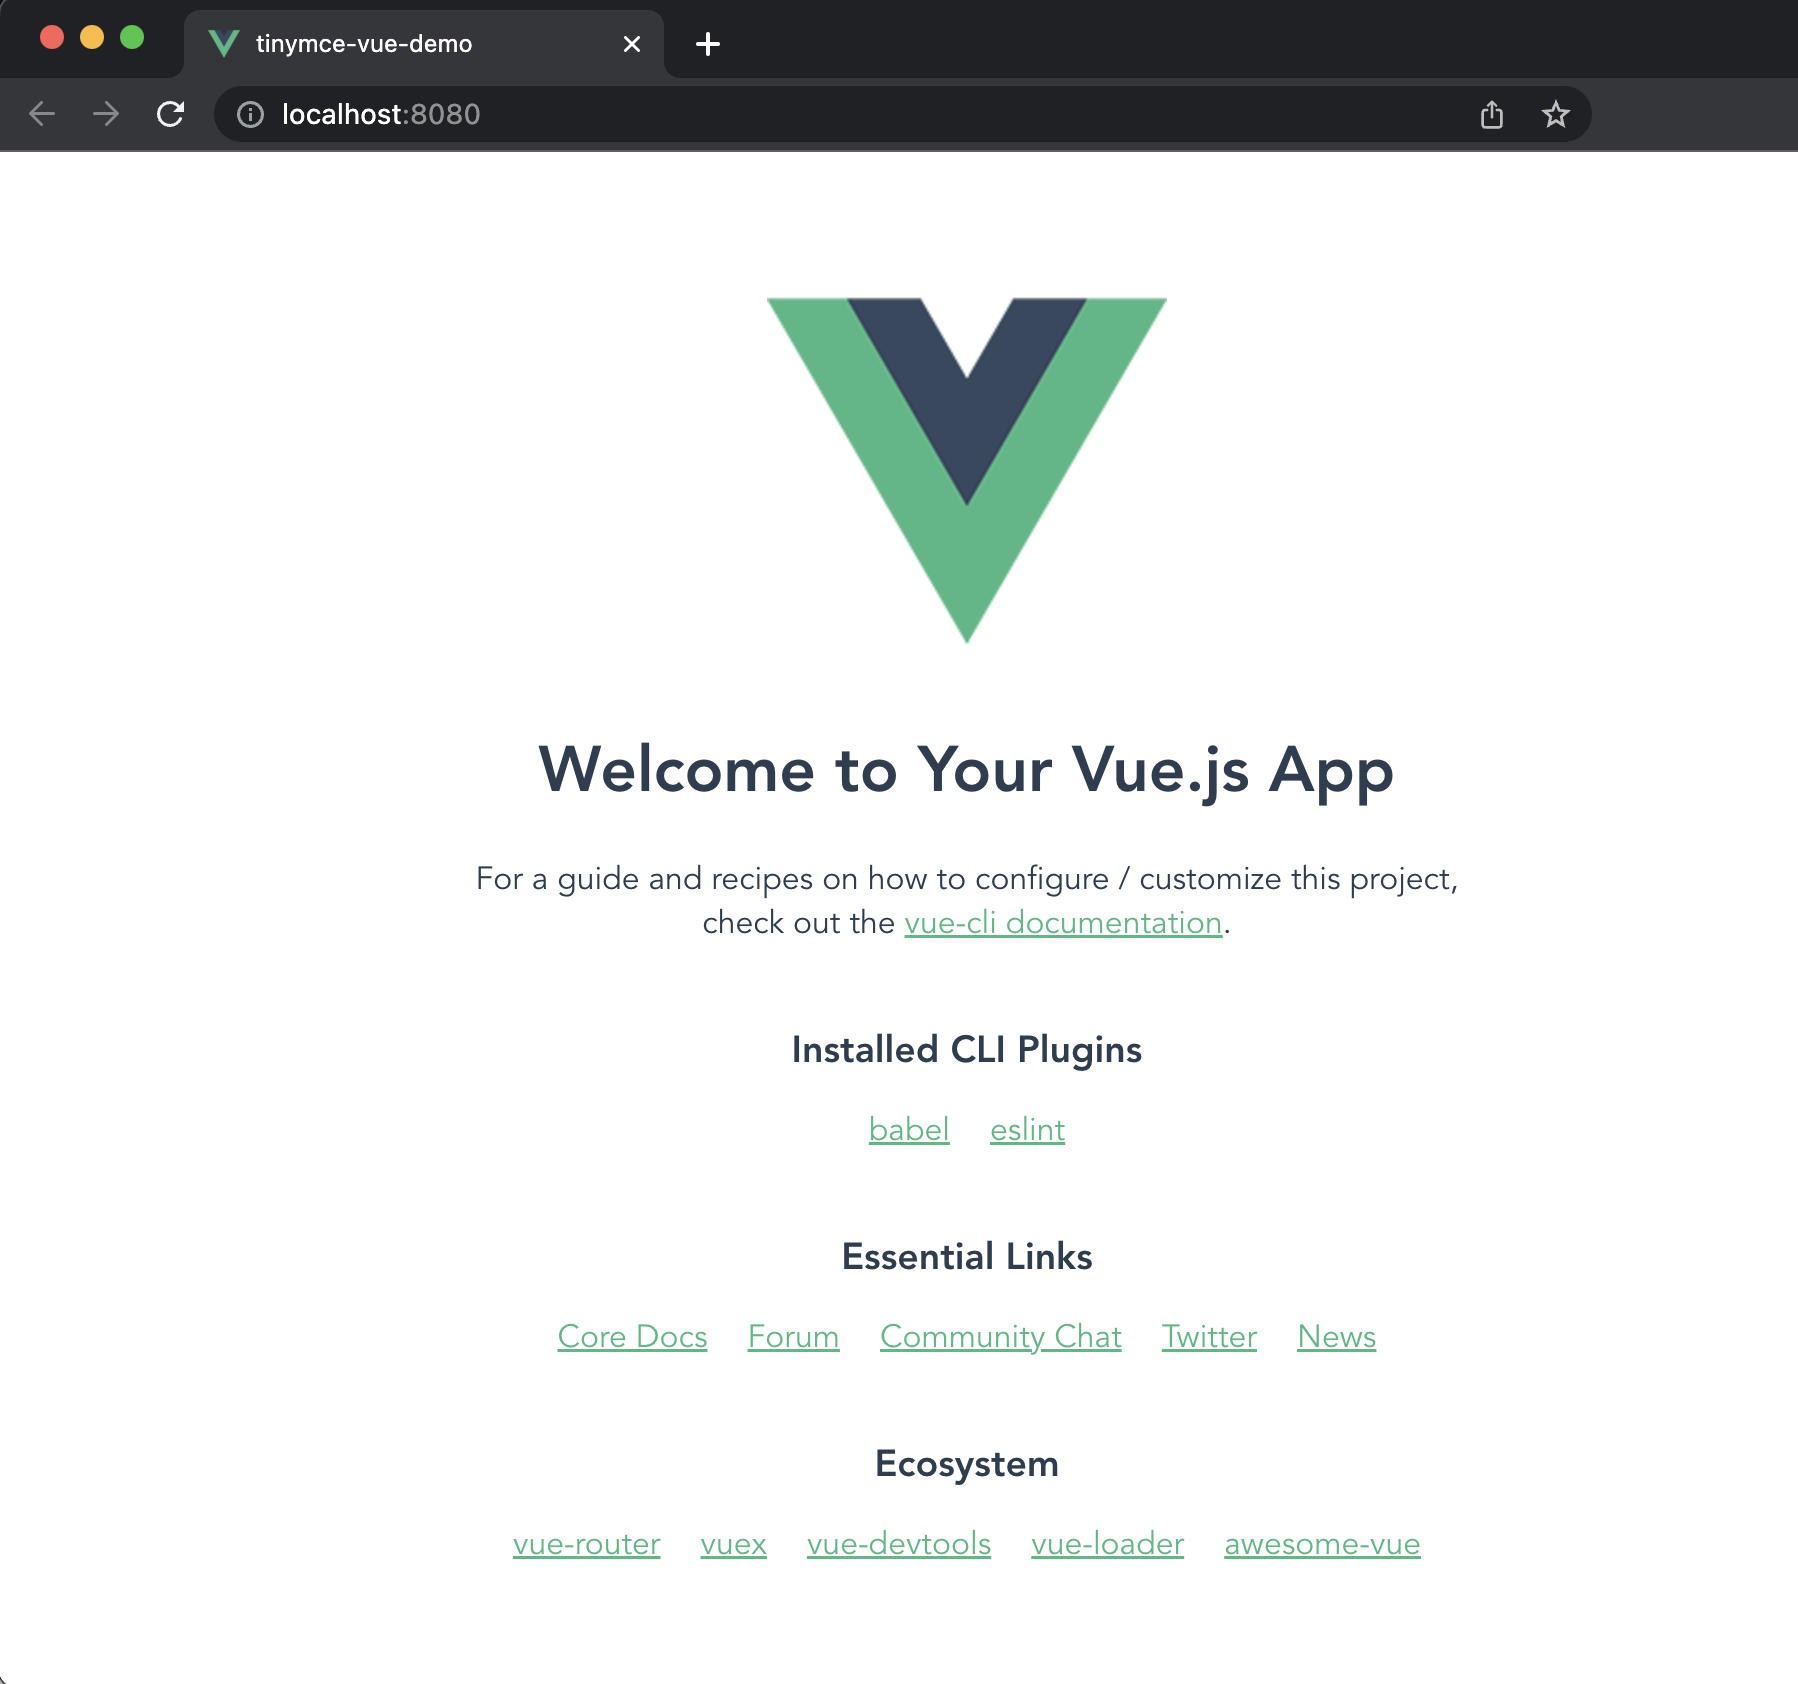 The demo Vue app open in the browser